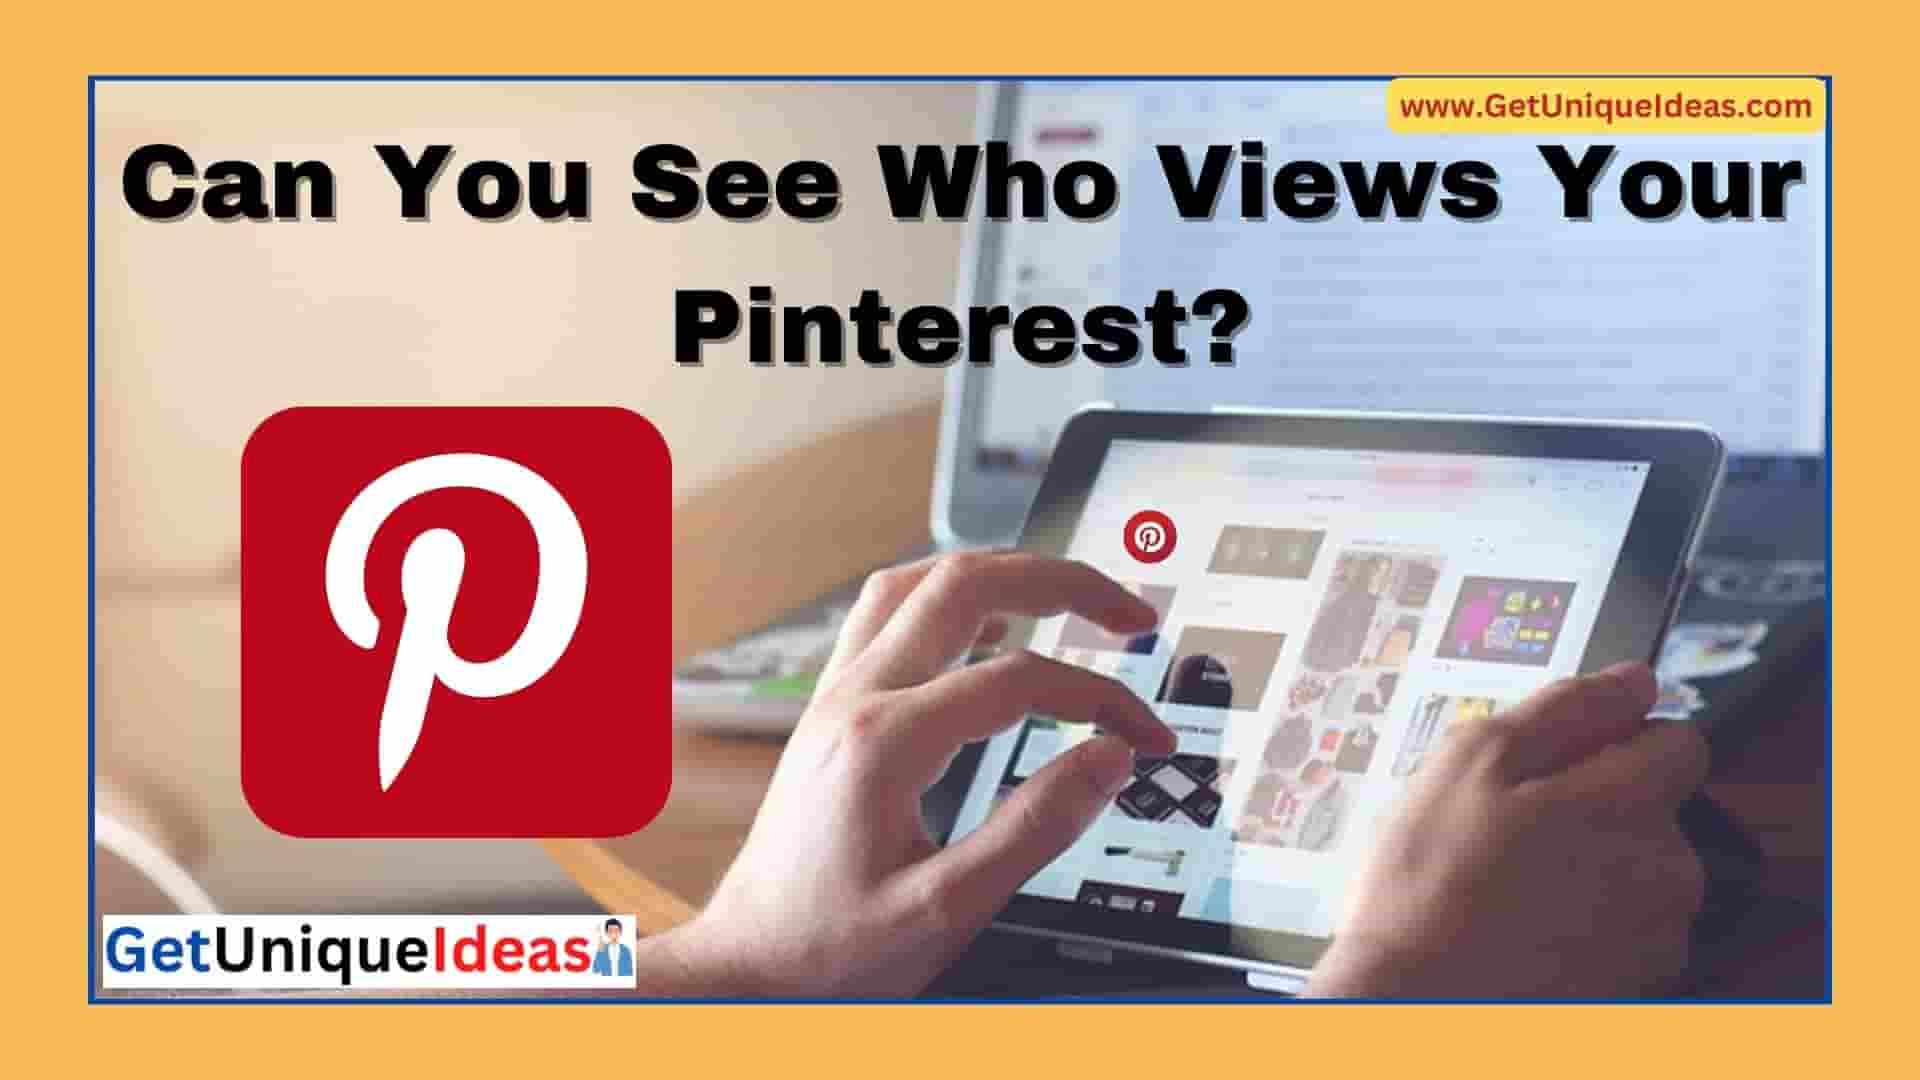 Can You See Who Views Your Pinterest